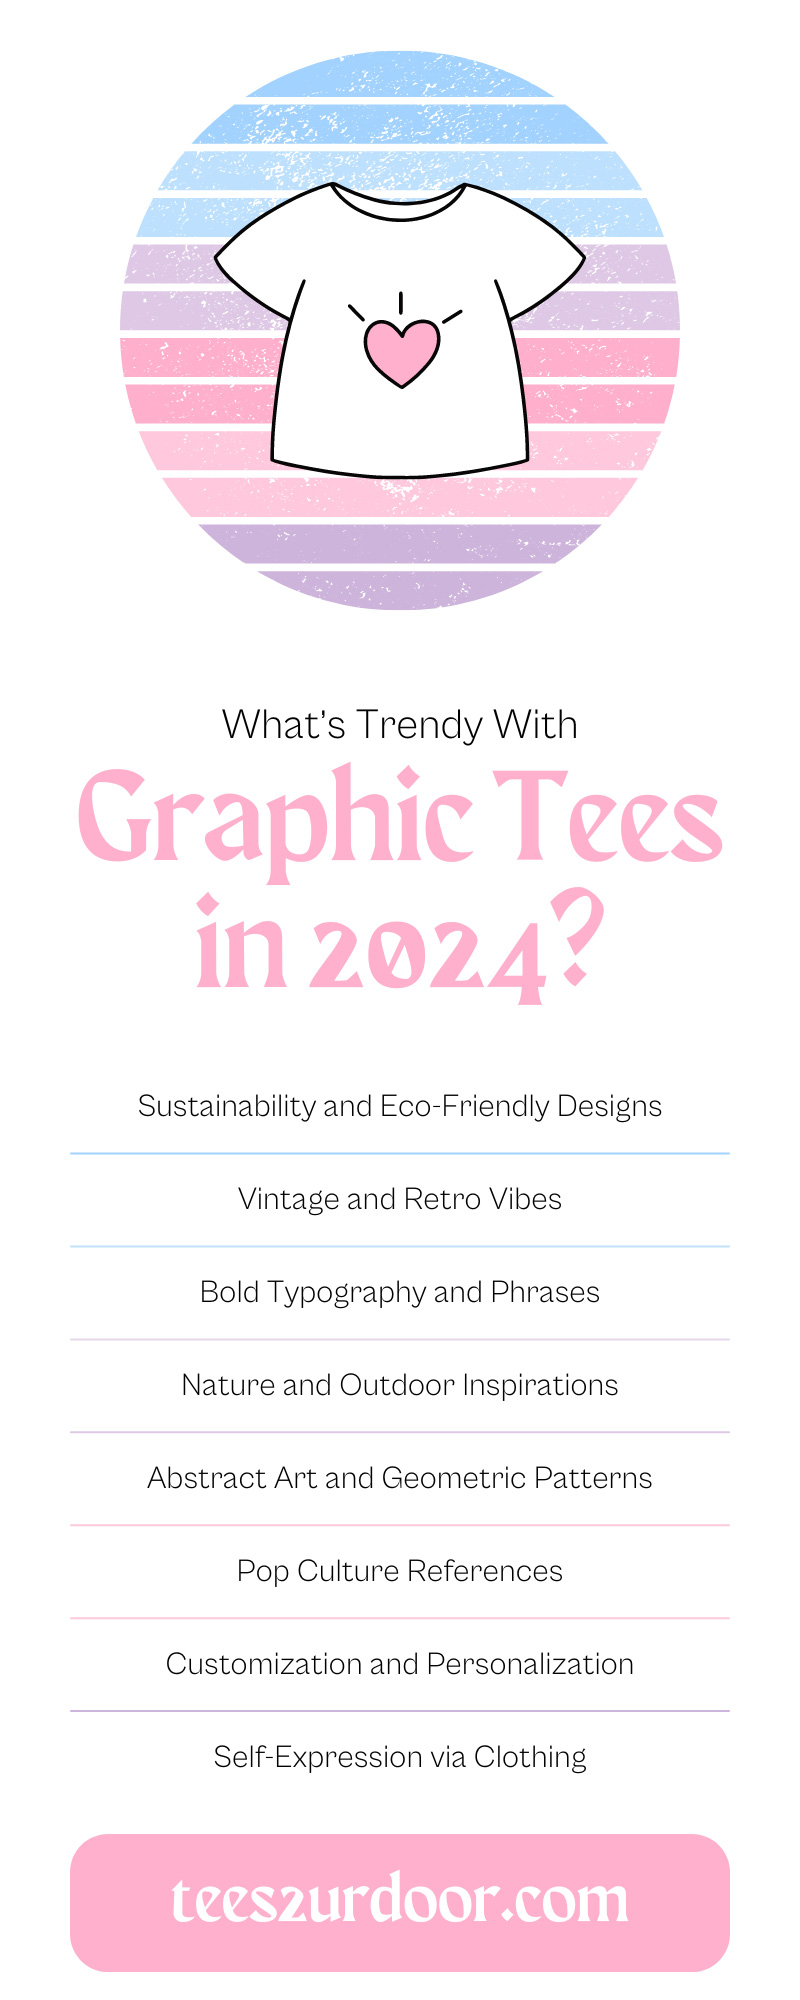 What’s Trendy With Graphic Tees in 2024?